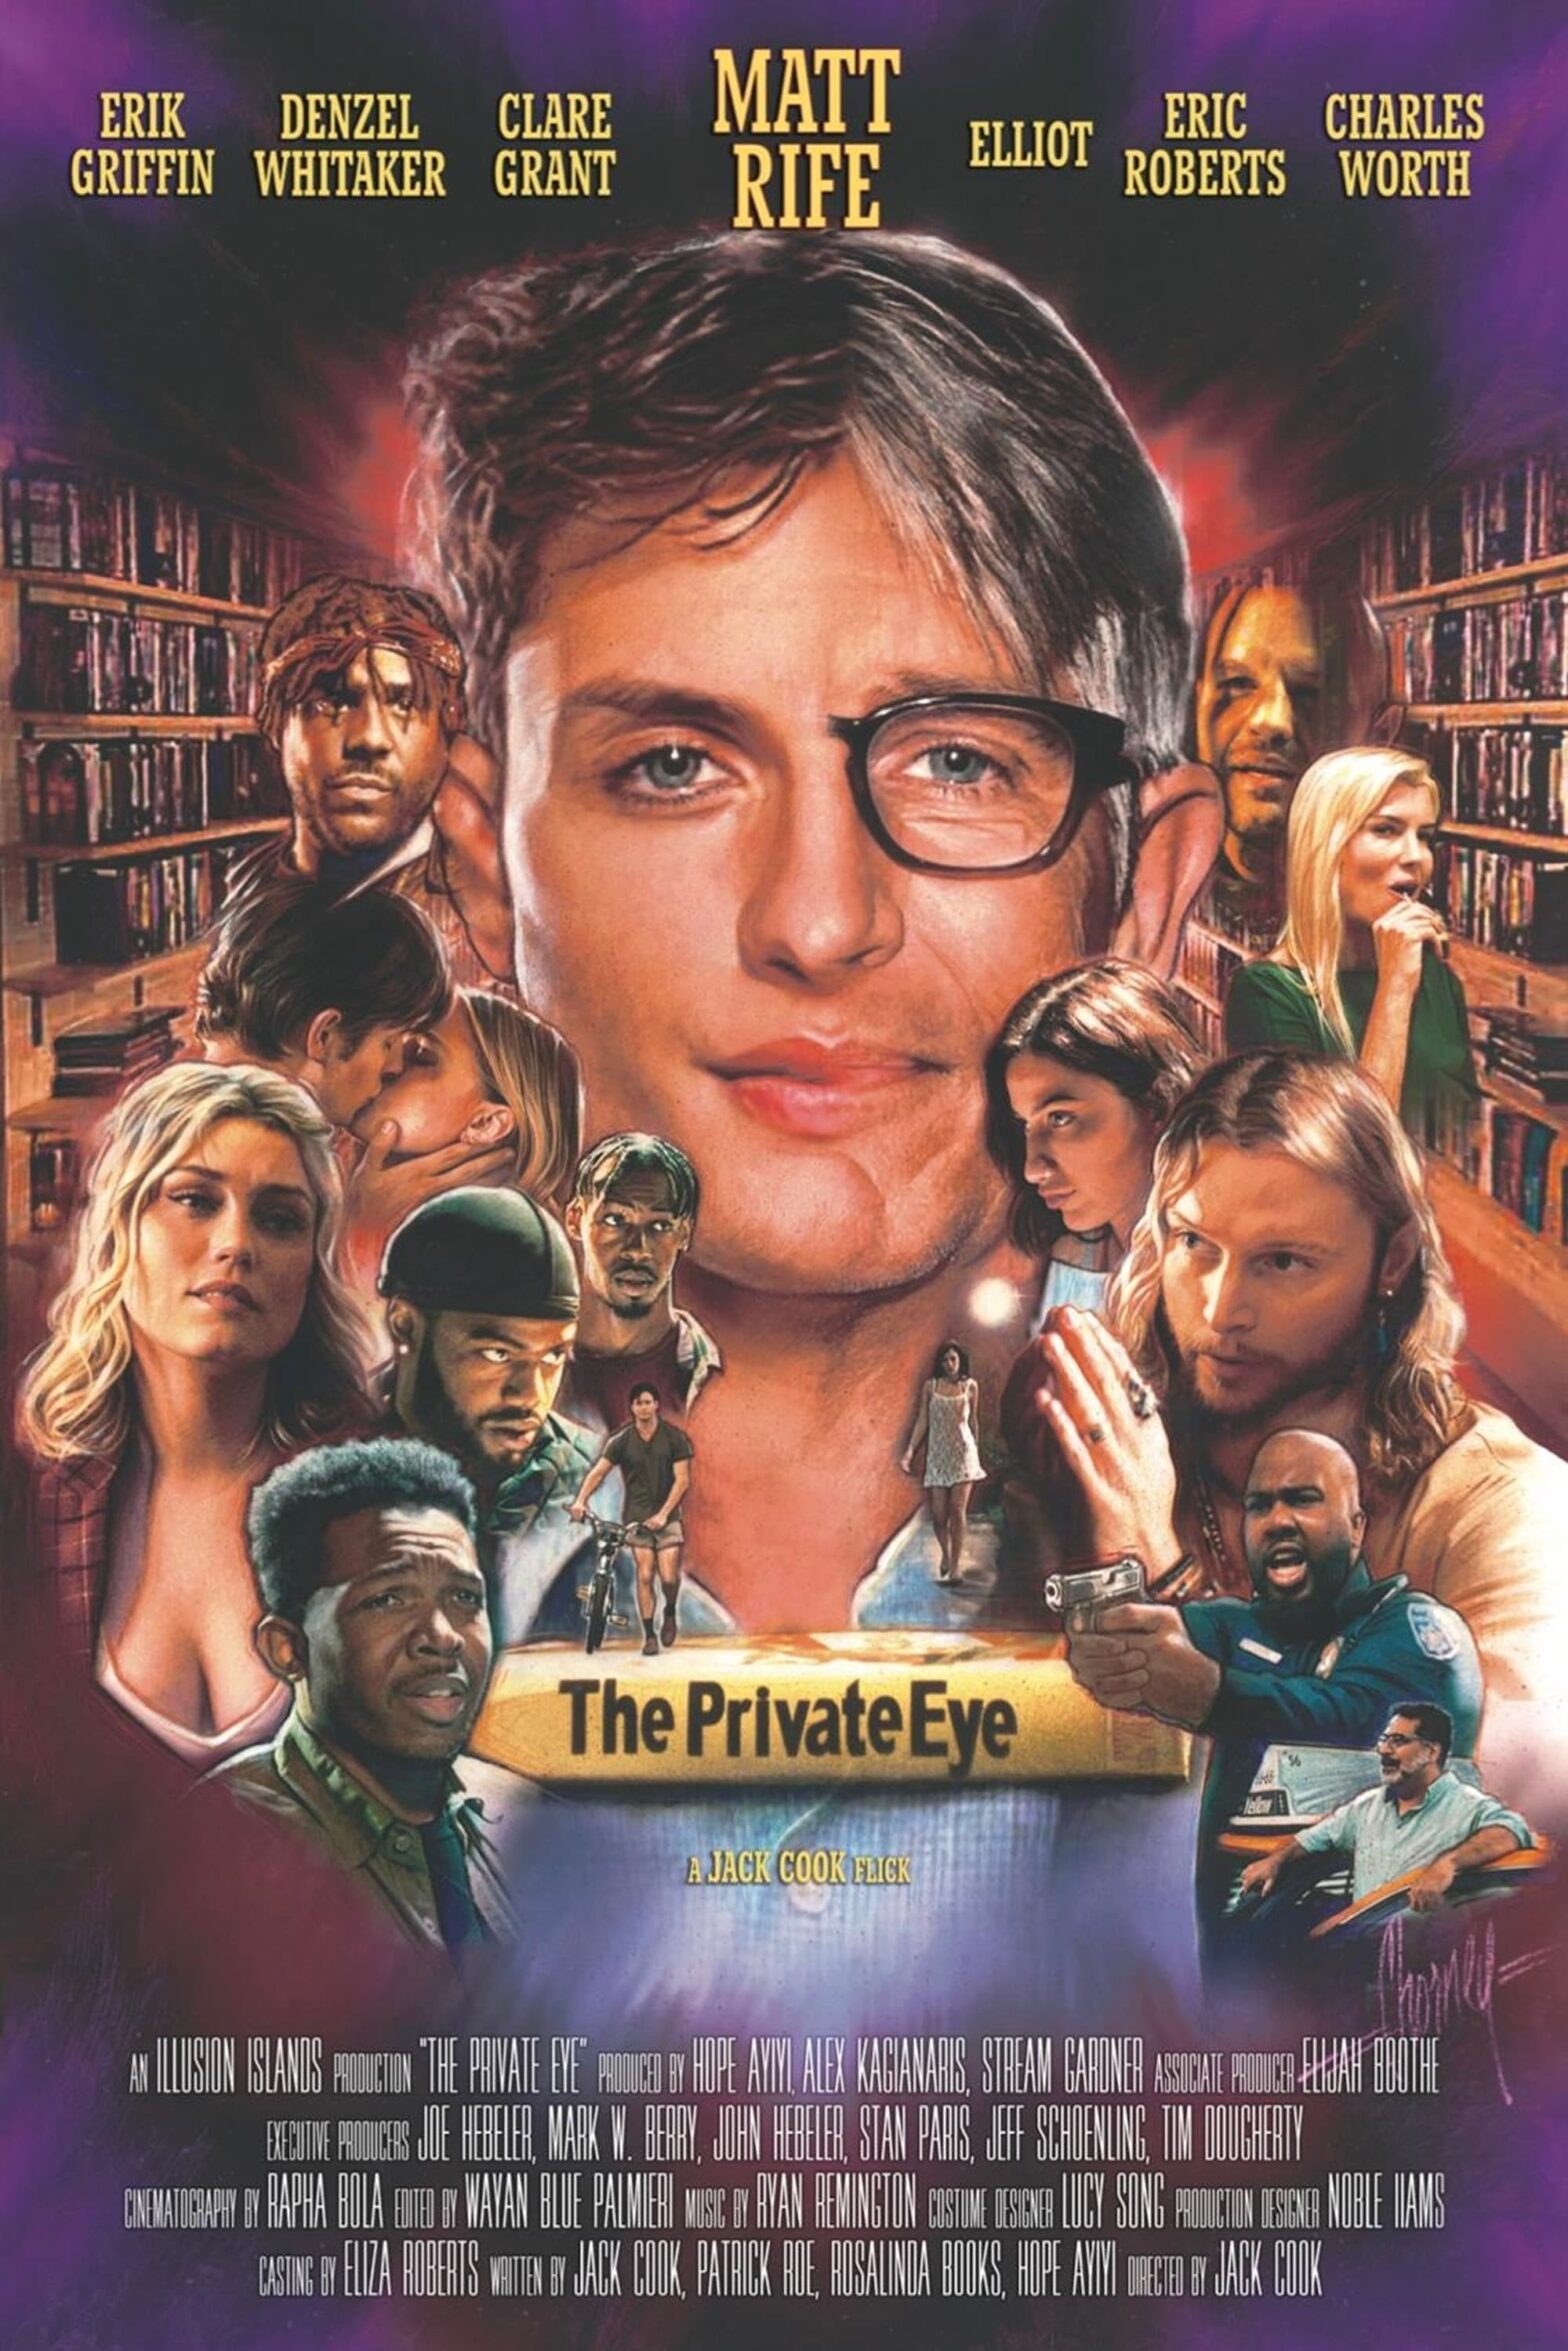 Poster for the movie "The Private Eye"